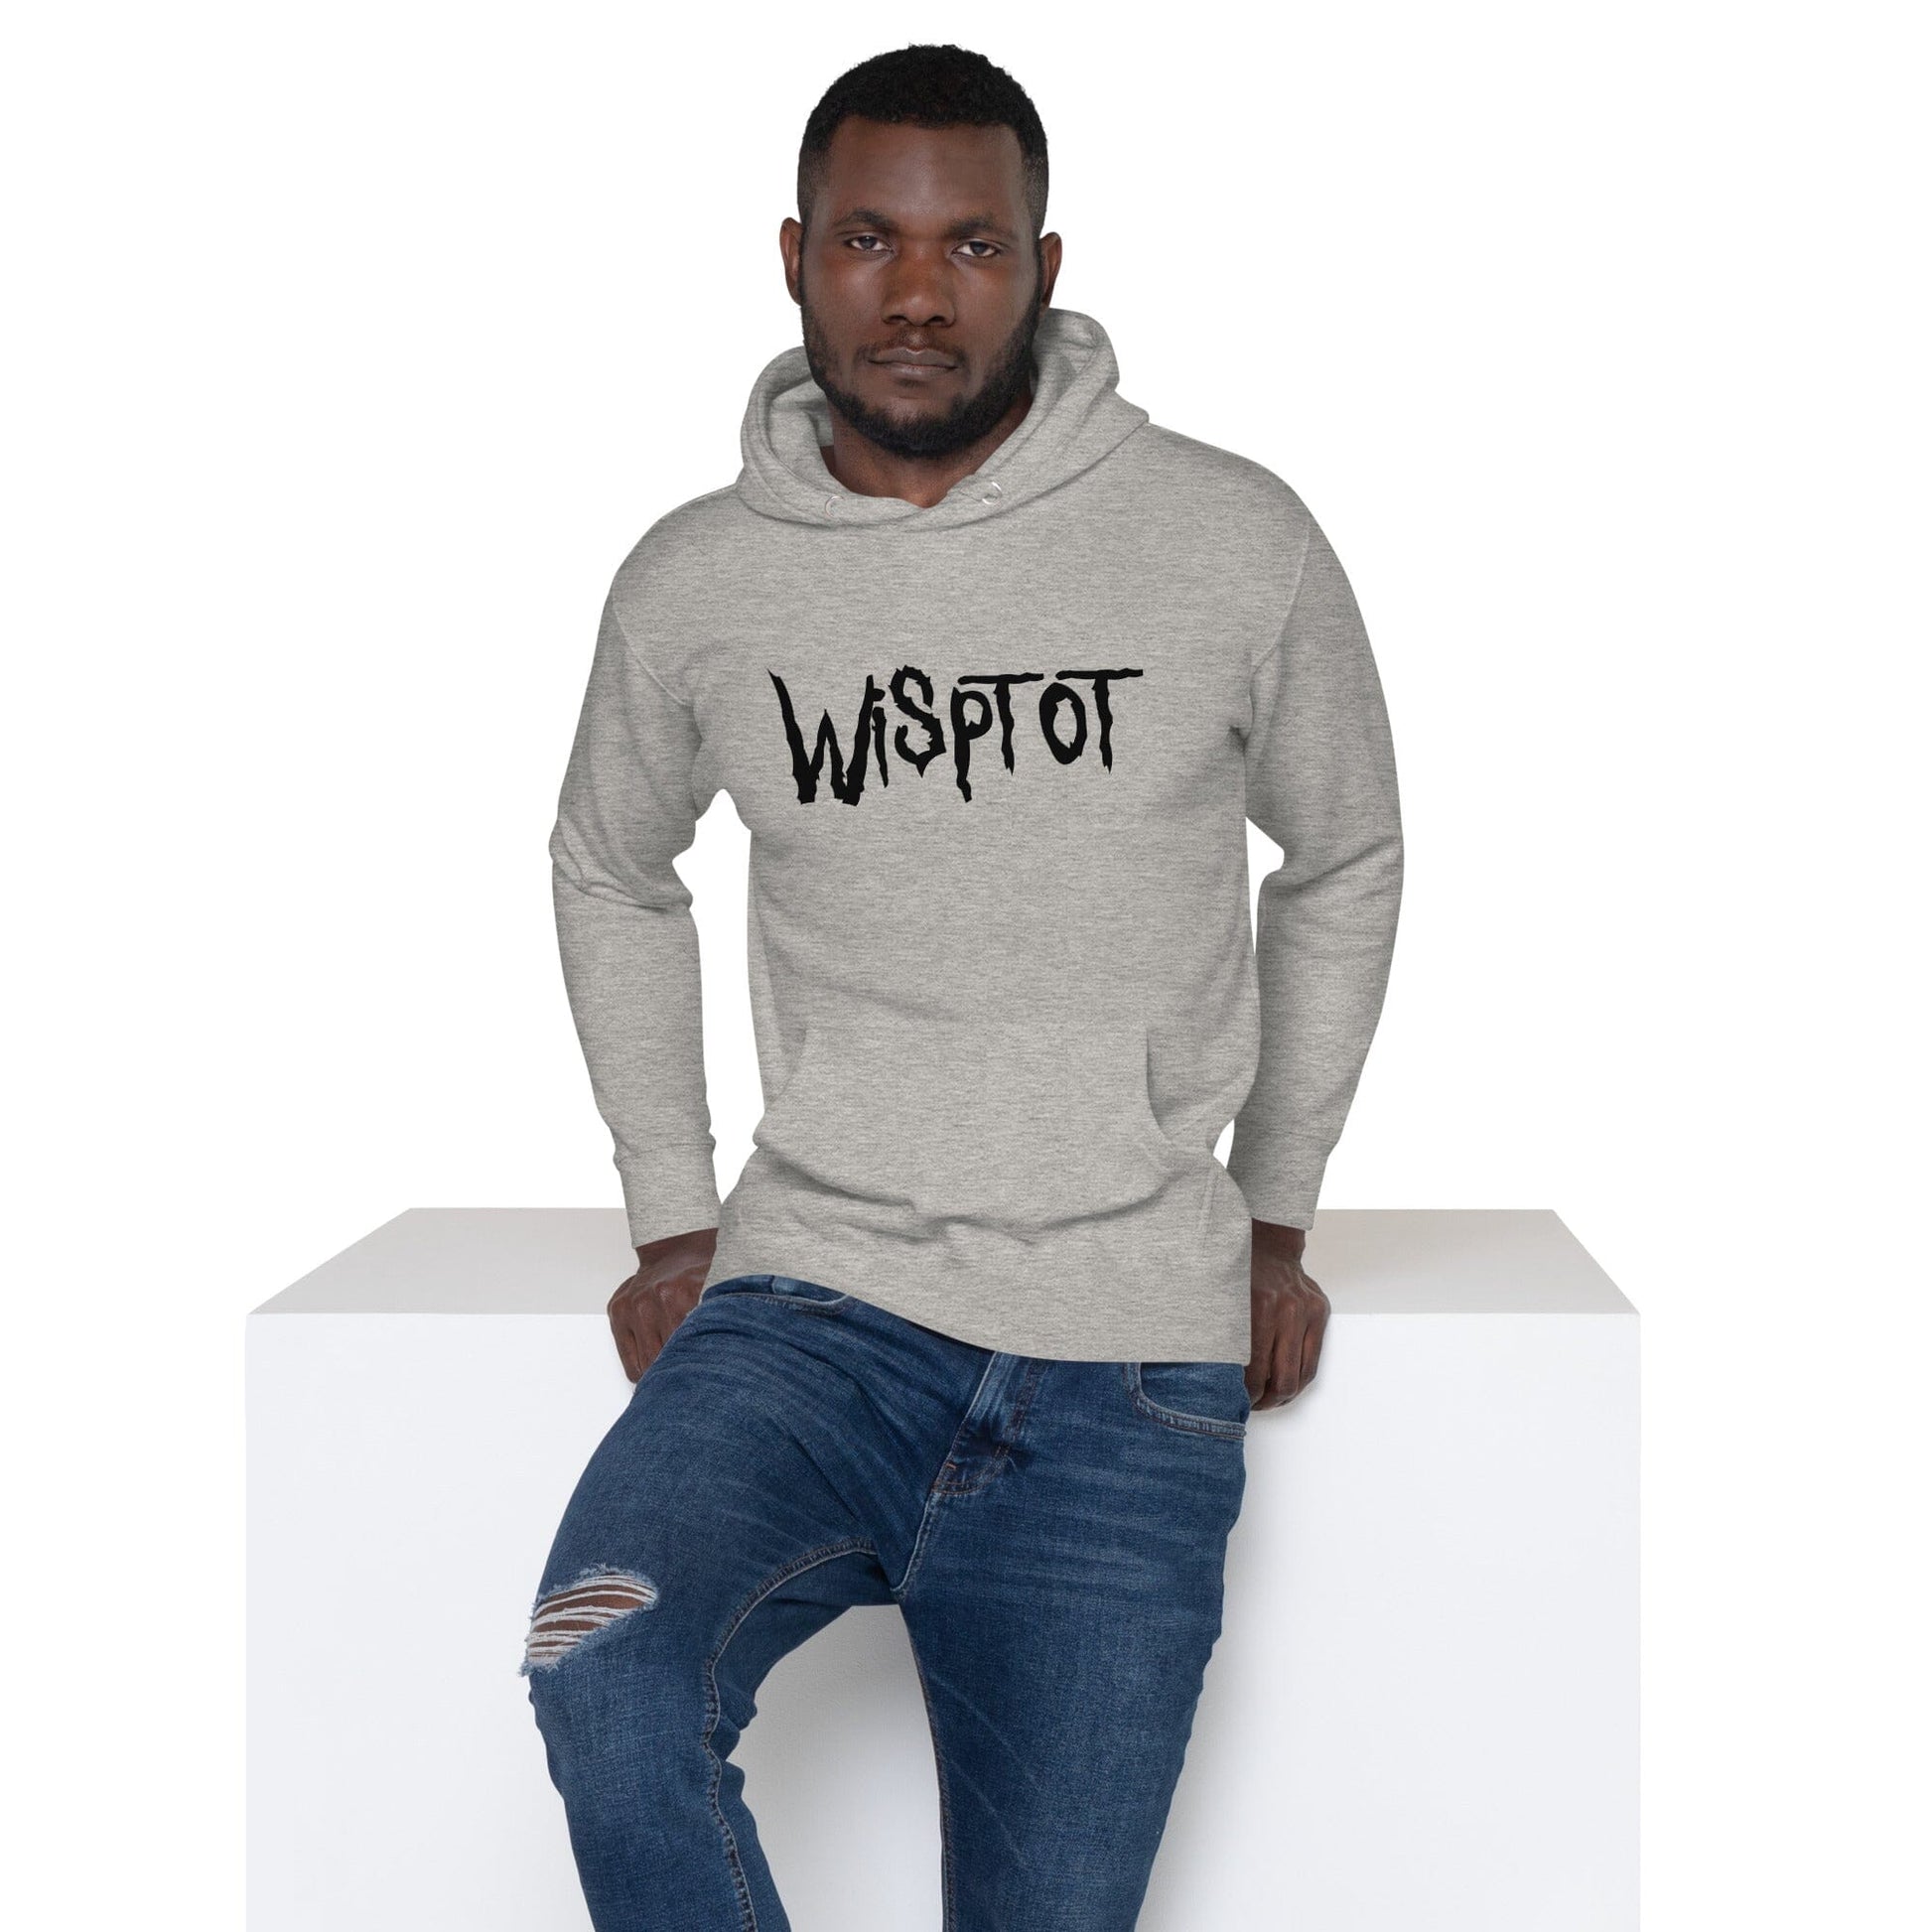 WispTot Hoodie [Unfoiled] (All net proceeds go to equally to Kitty CrusAIDe and Rags to Riches Animal Rescue) JoyousJoyfulJoyness Carbon Grey S 